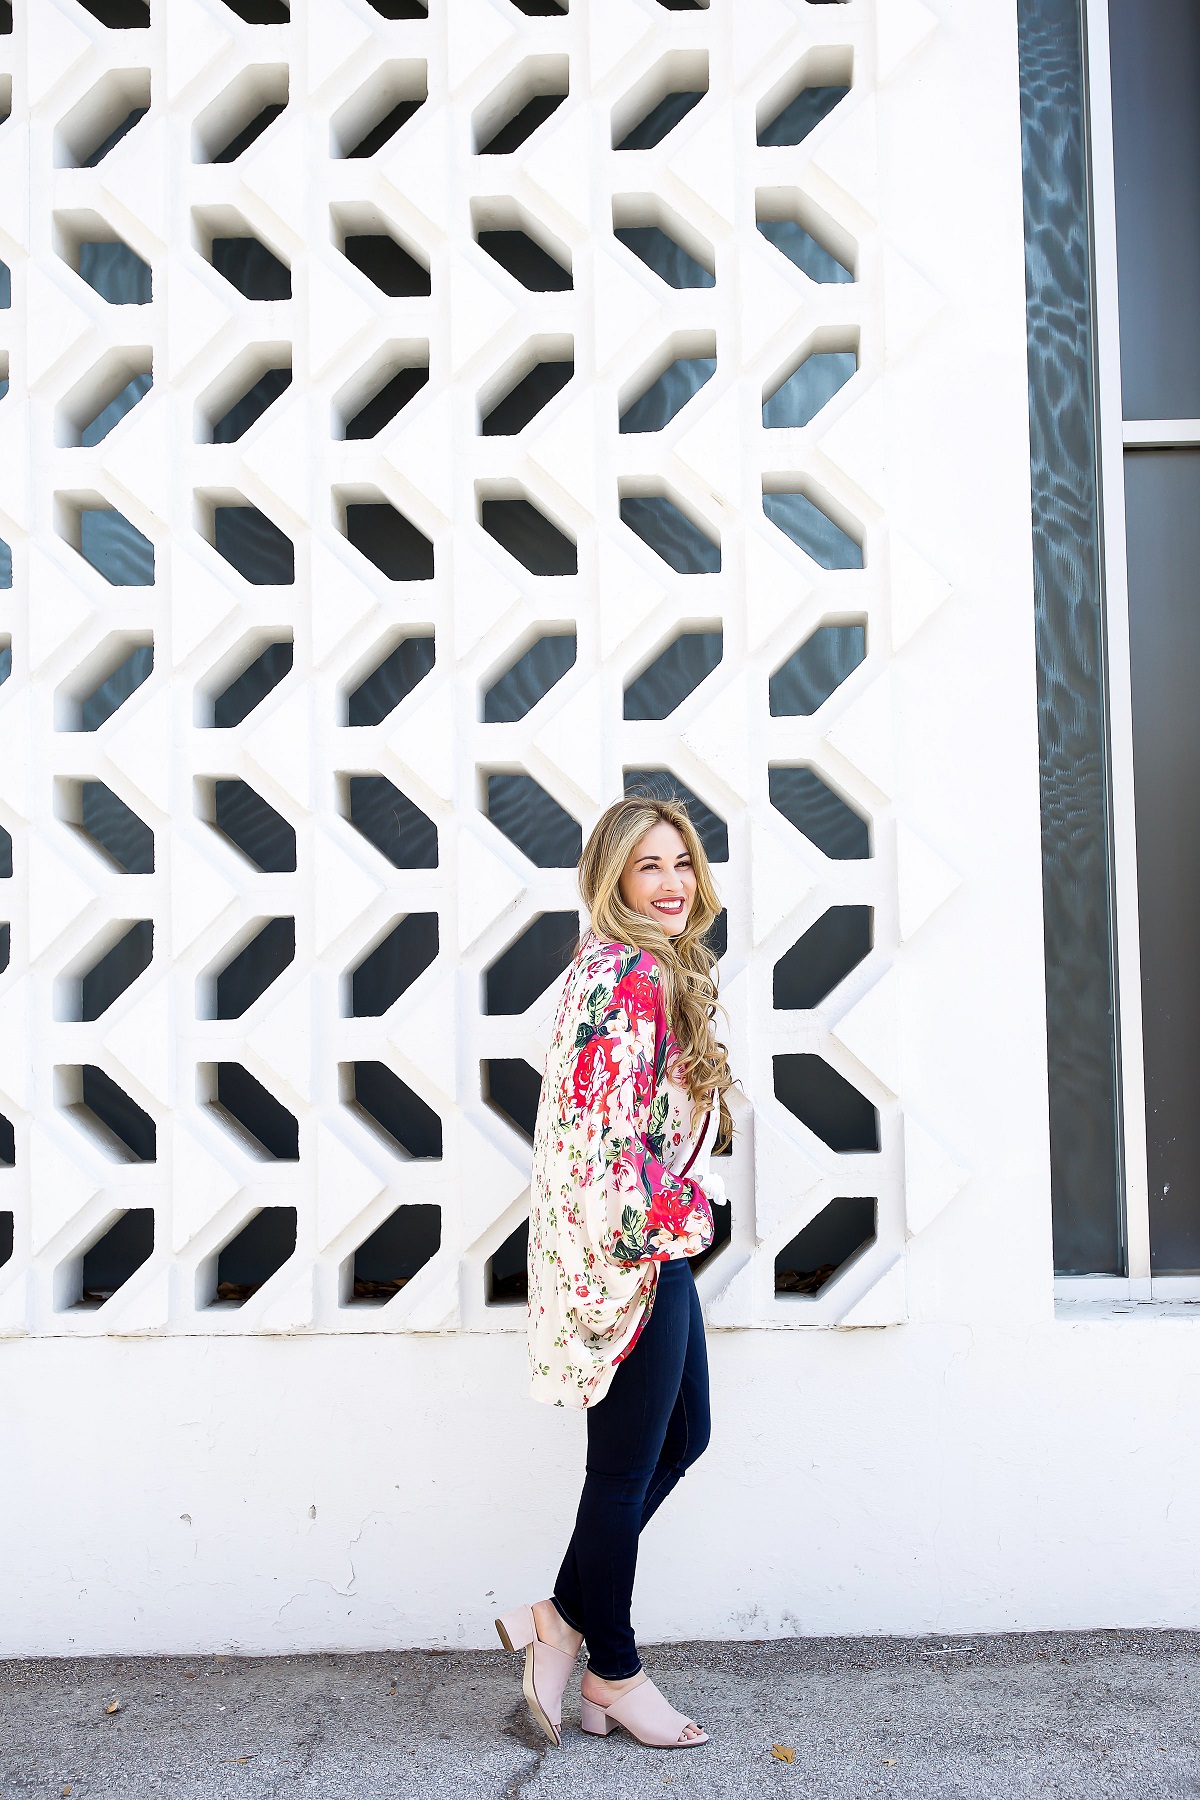 Spring Favorites by popular style blogger Walking in Memphis in High Heels